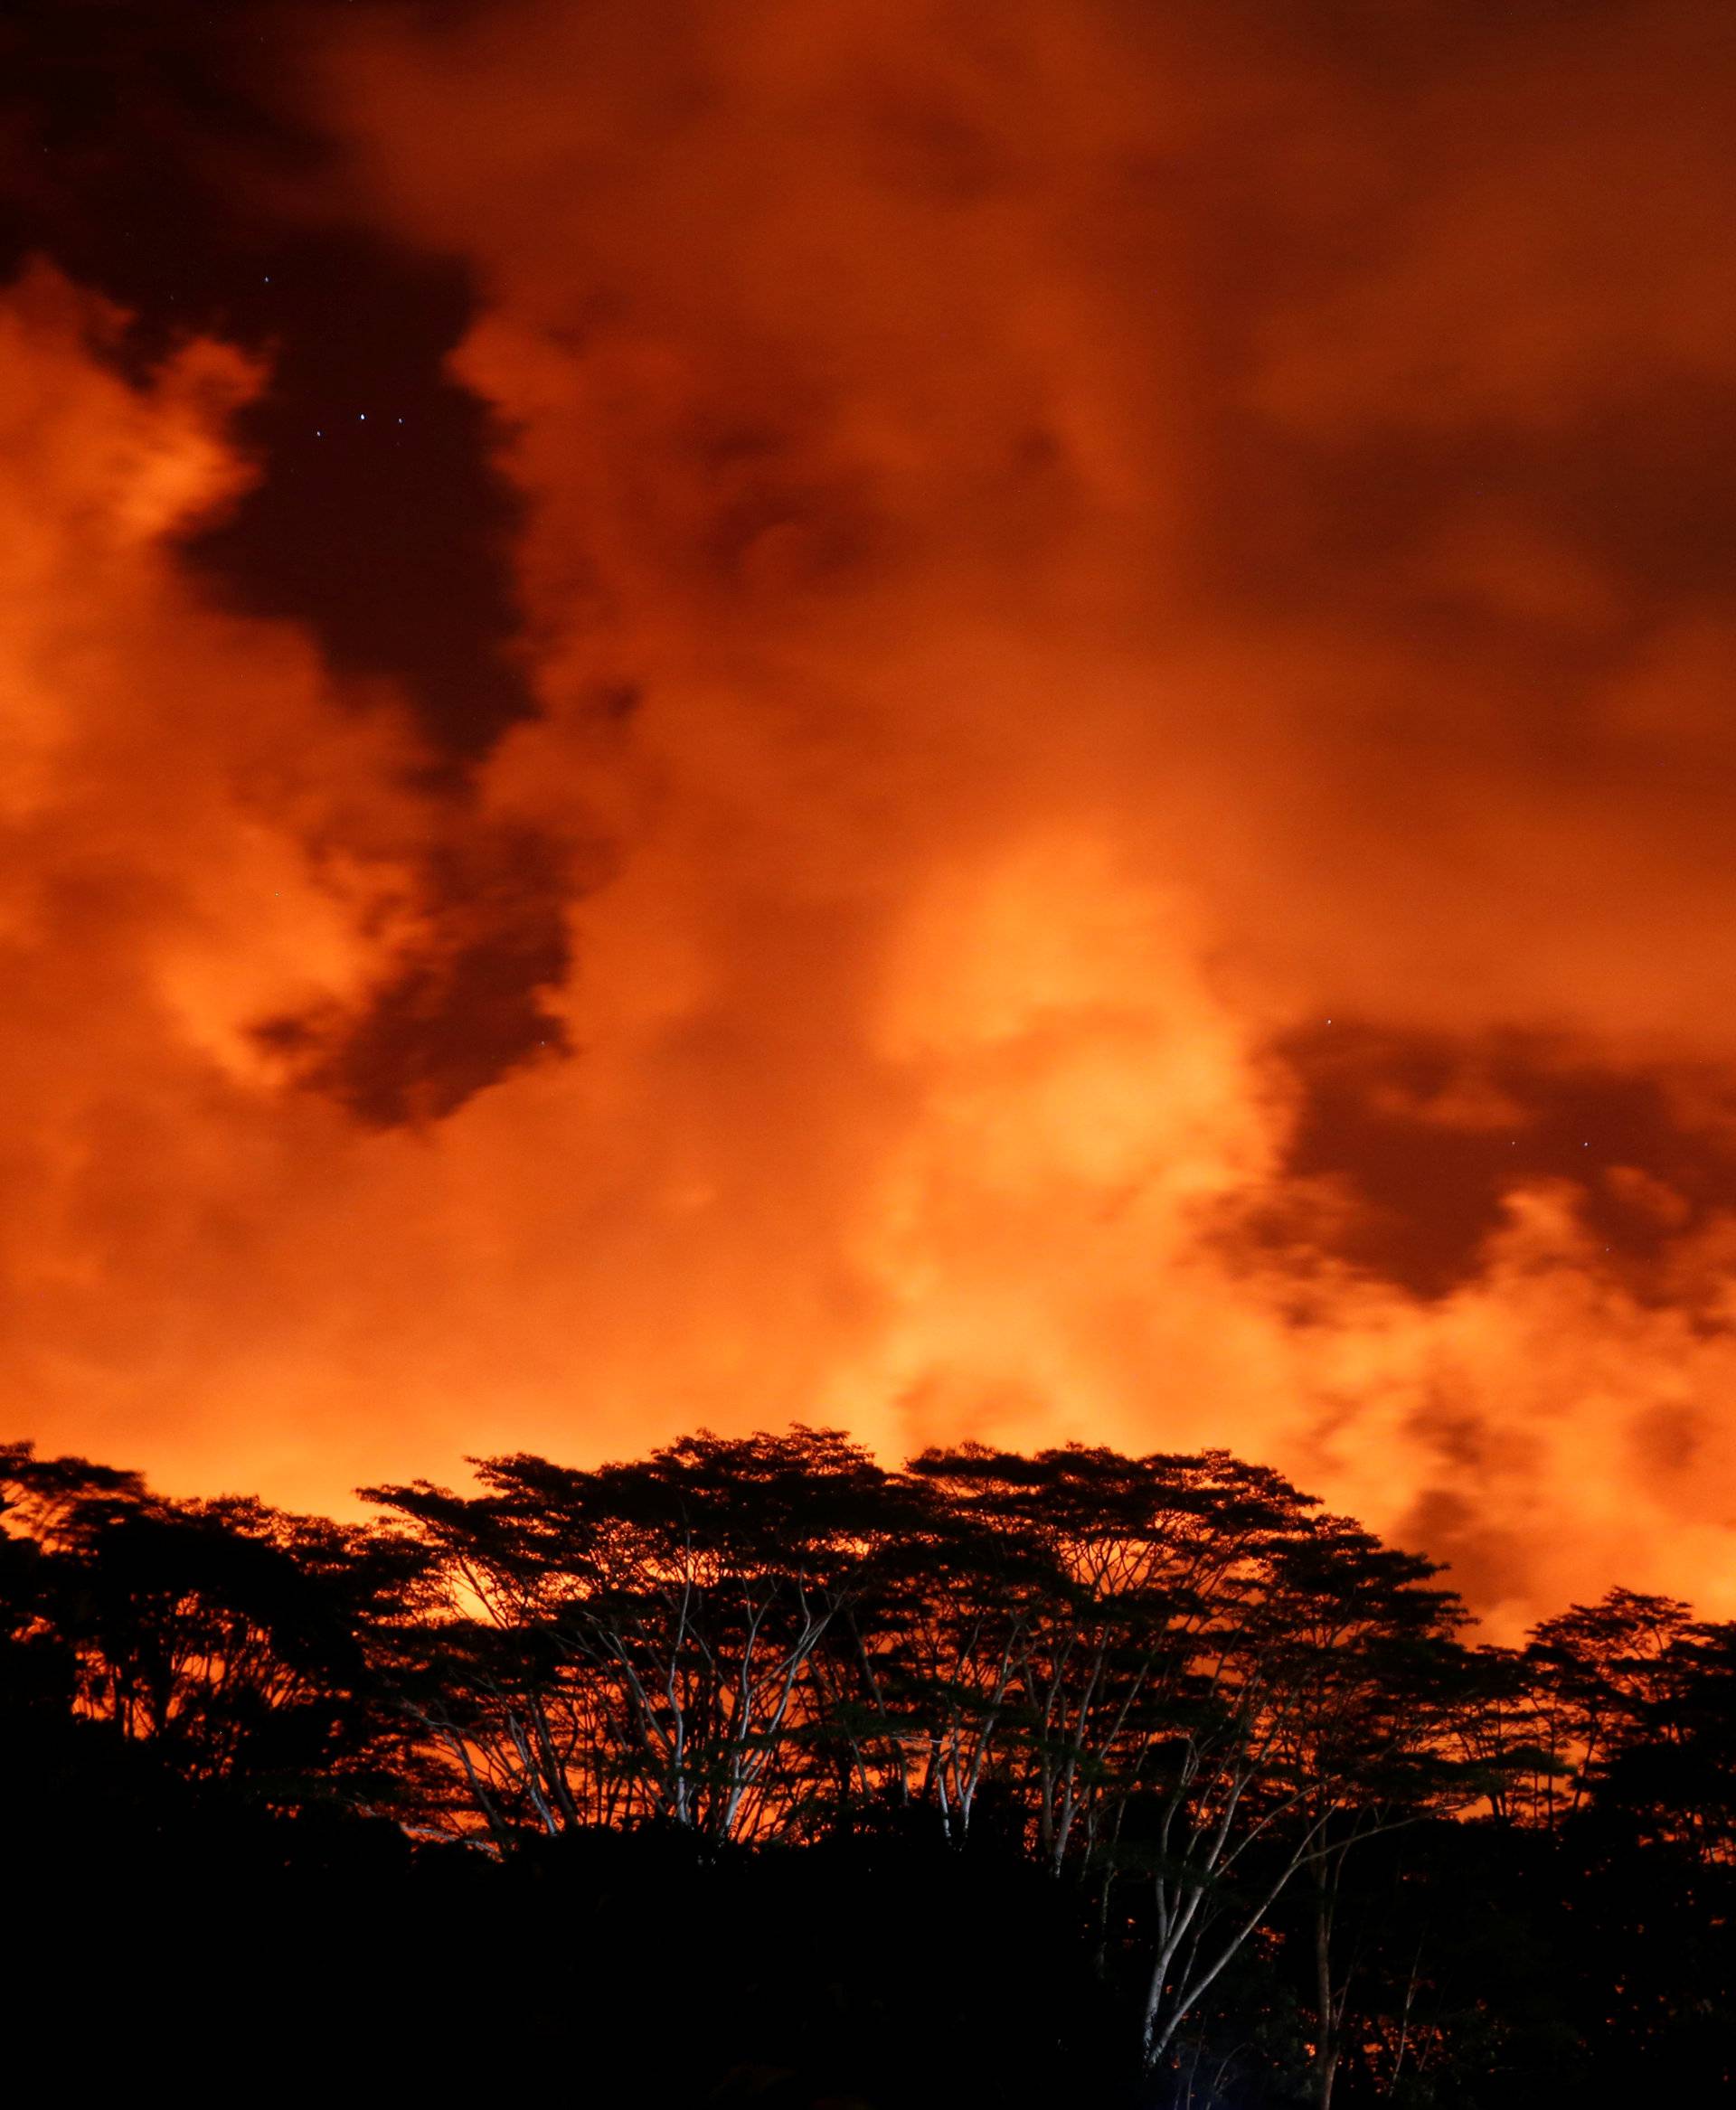 Clouds glow above a lava flow on the outskirts of Pahoa